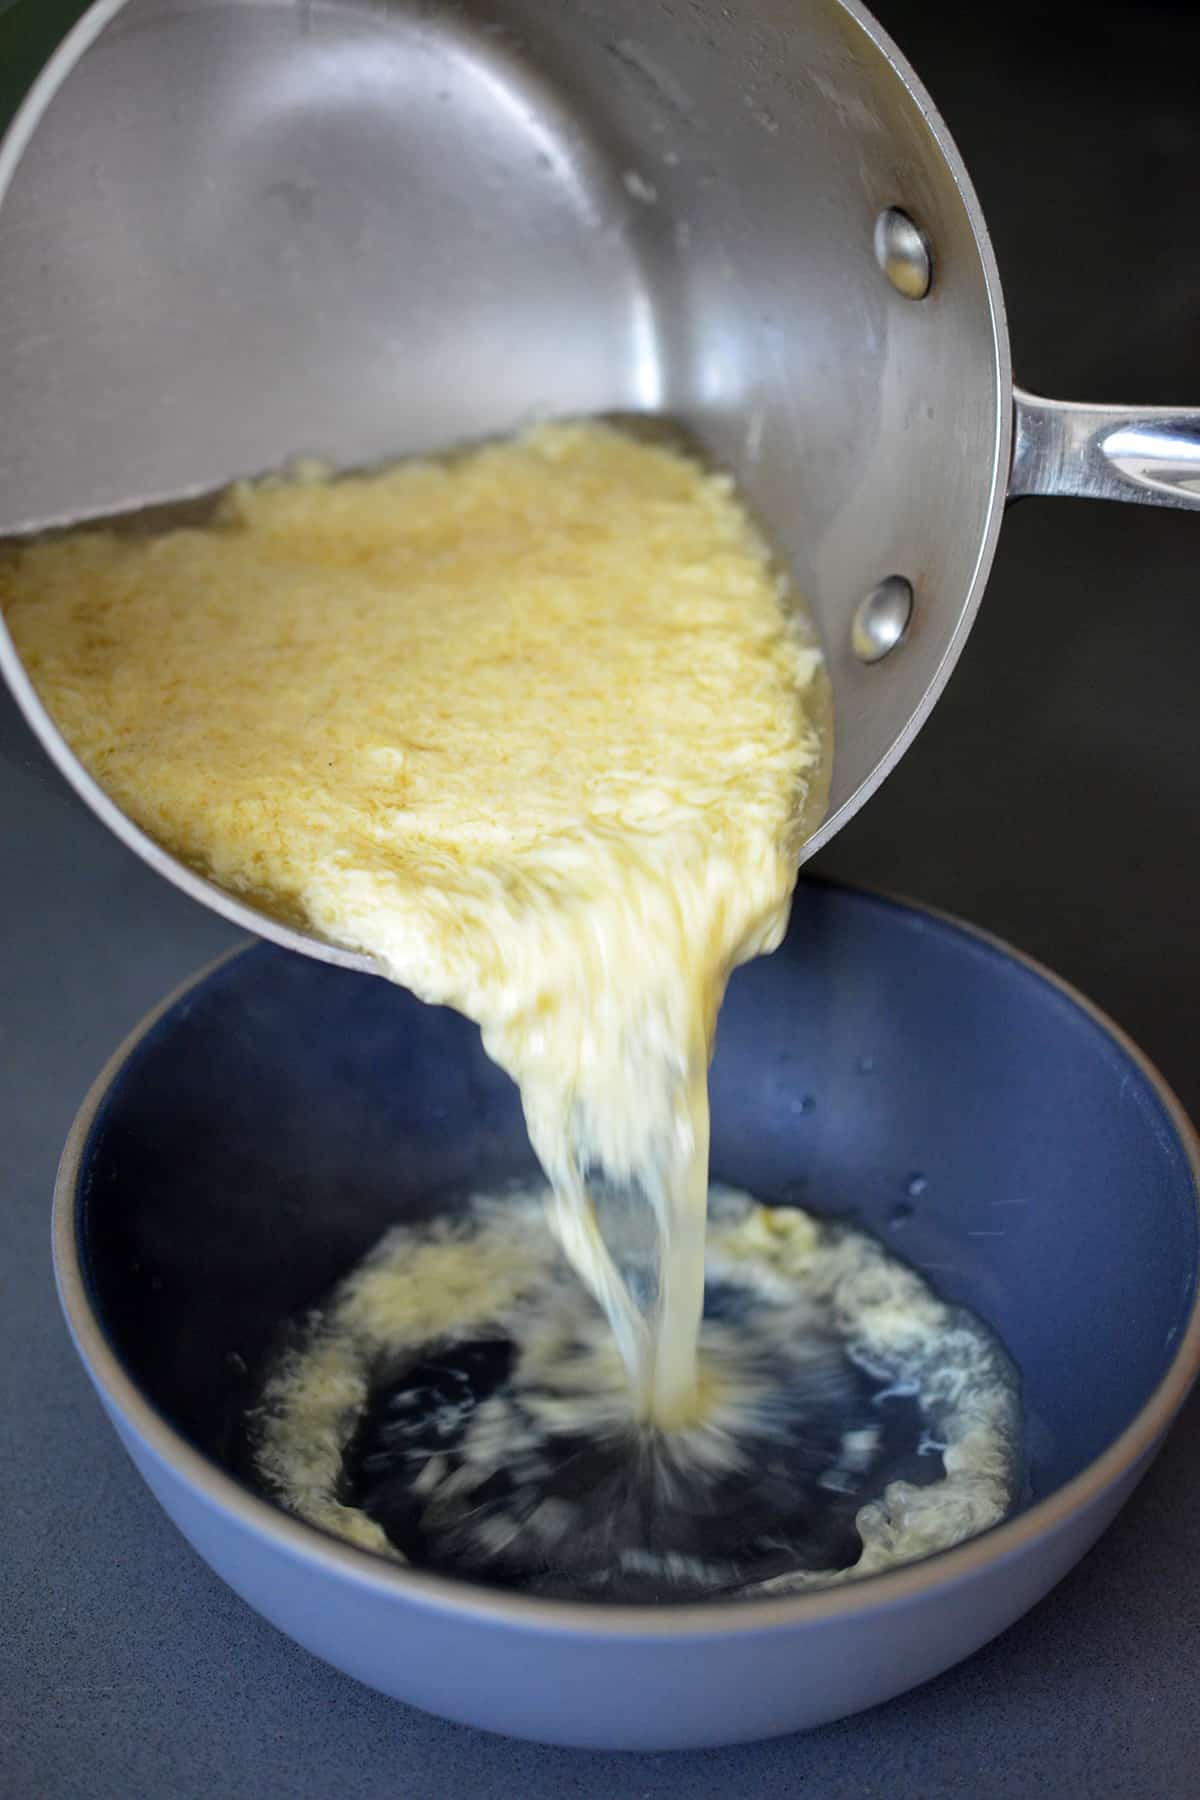 Pouring egg drop soup from a small saucepan into a blue bowl.